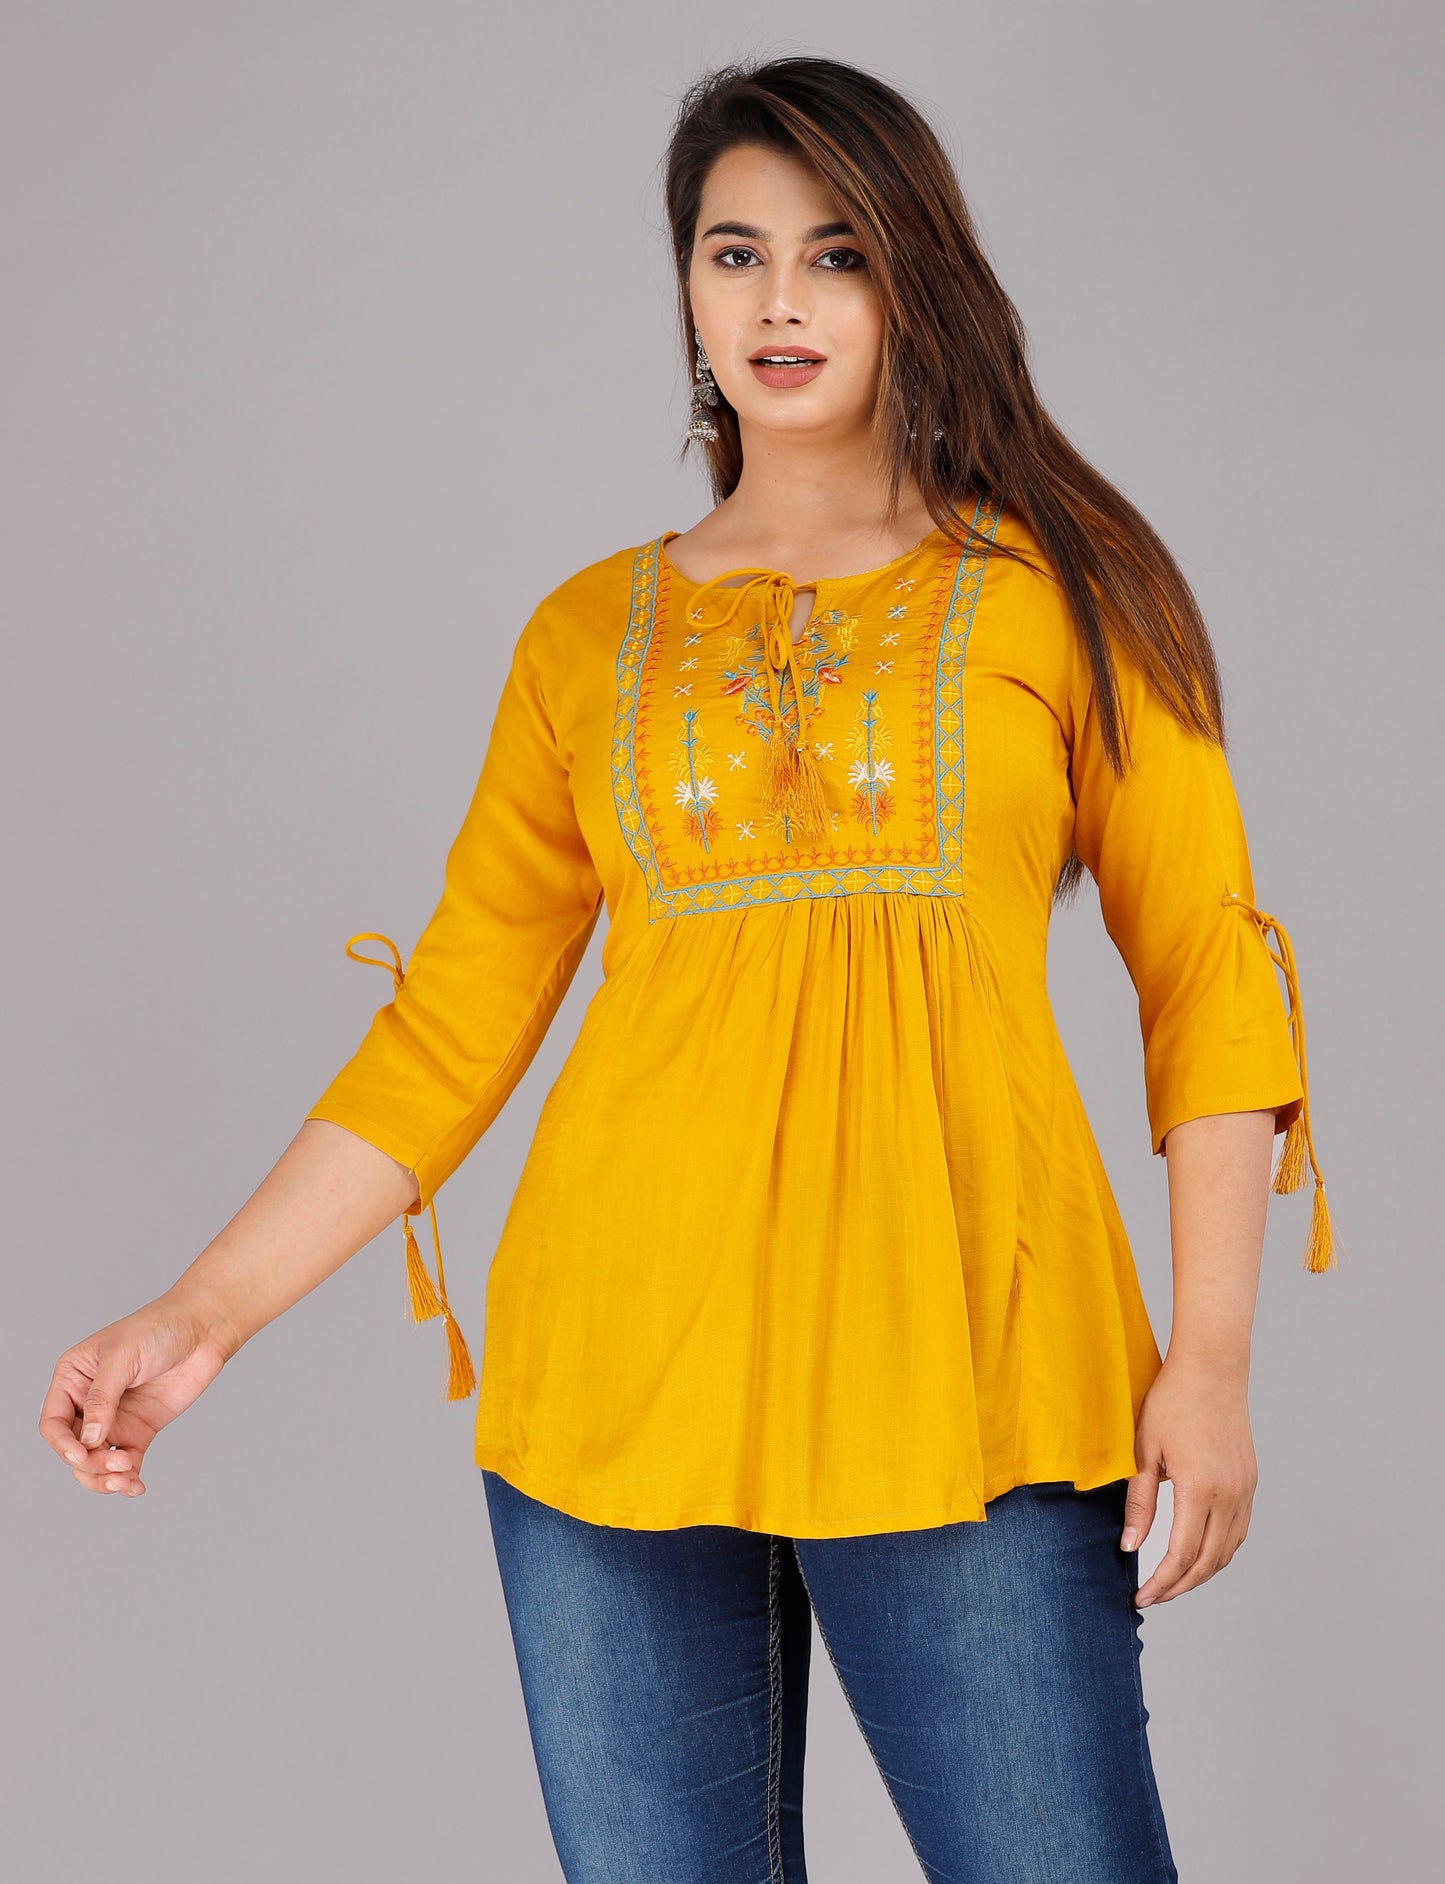 Mustard Yellow Color 3/4th Sleeve Embroidered Top